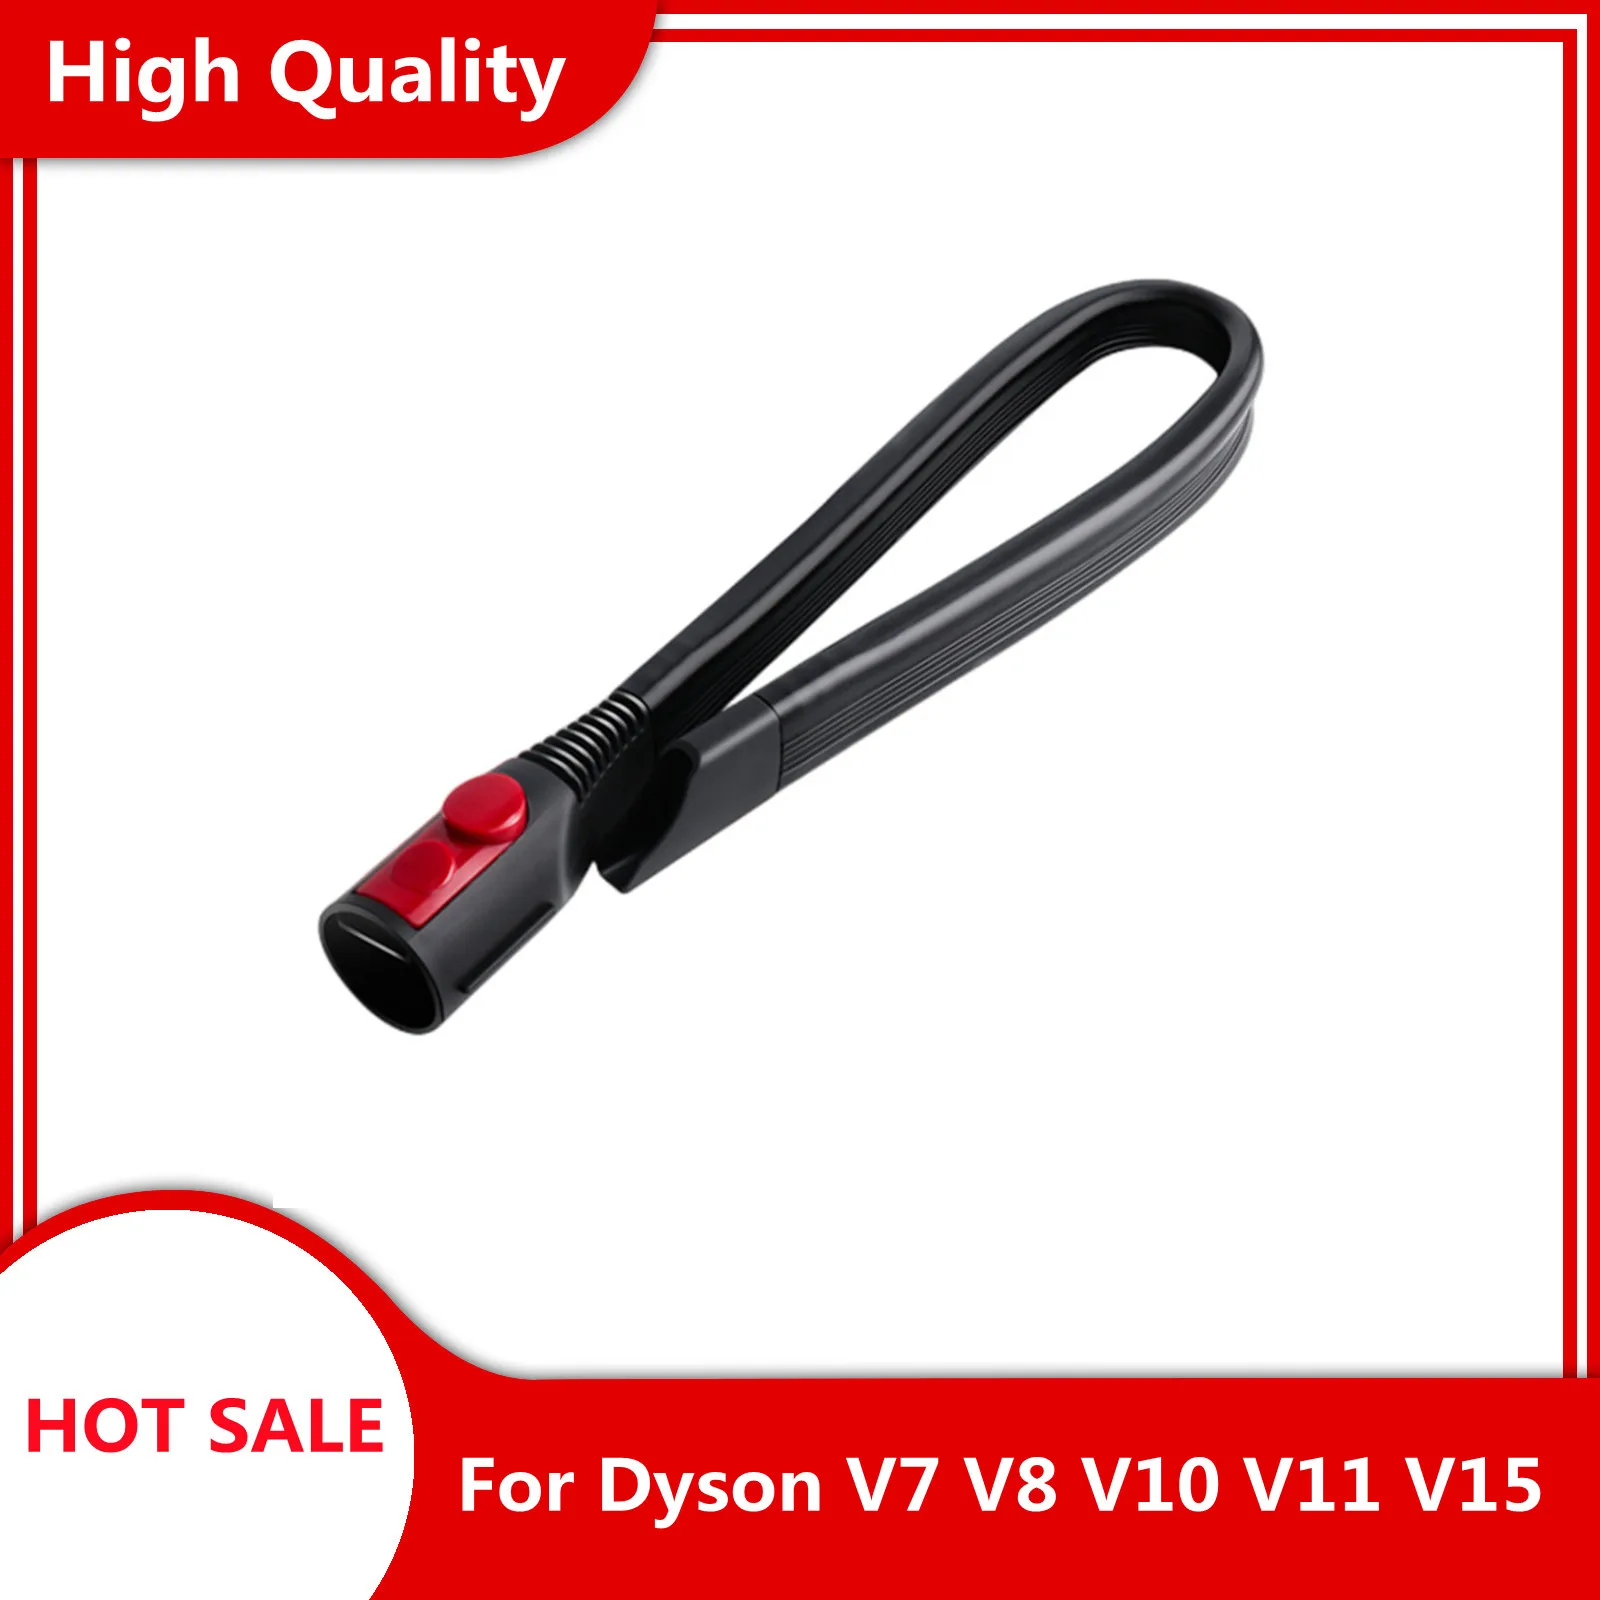 Suitable for Corners and Gaps Cleaning Flexible Crevice Tool for Dyson Cordless Vacuum Cleaners V7 V8 V10 V11 V15 1pcs phone curved lcd screen spudger opening pry card tools ultra thin flexible mobile phone disassemble steel metal repair tool